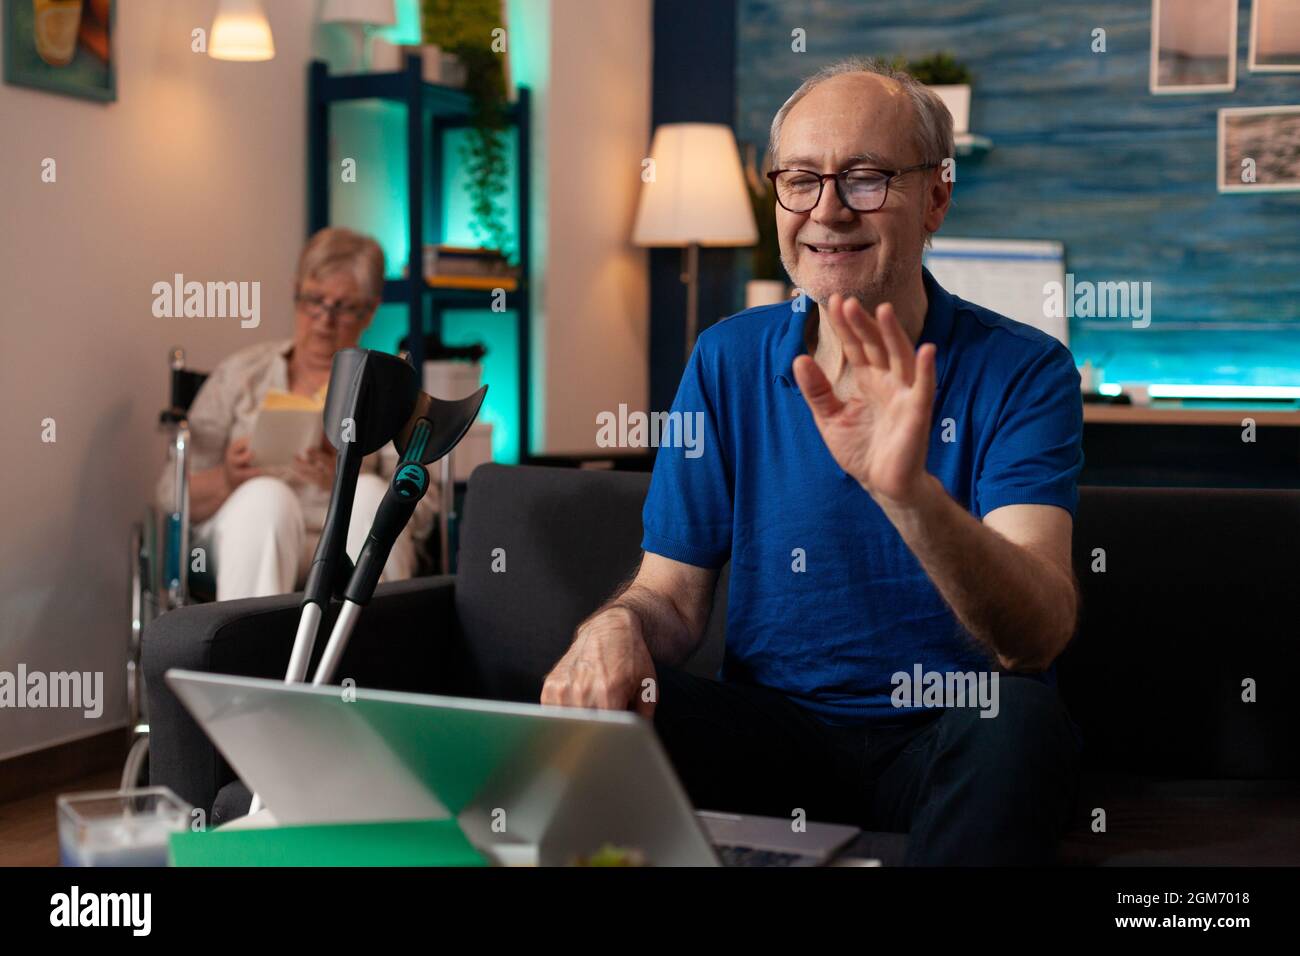 Elderly man waving at video call conference on laptop at home. Senior person using online remote communication with gadget on sofa while retired disabled woman sitting in wheelchair Stock Photo